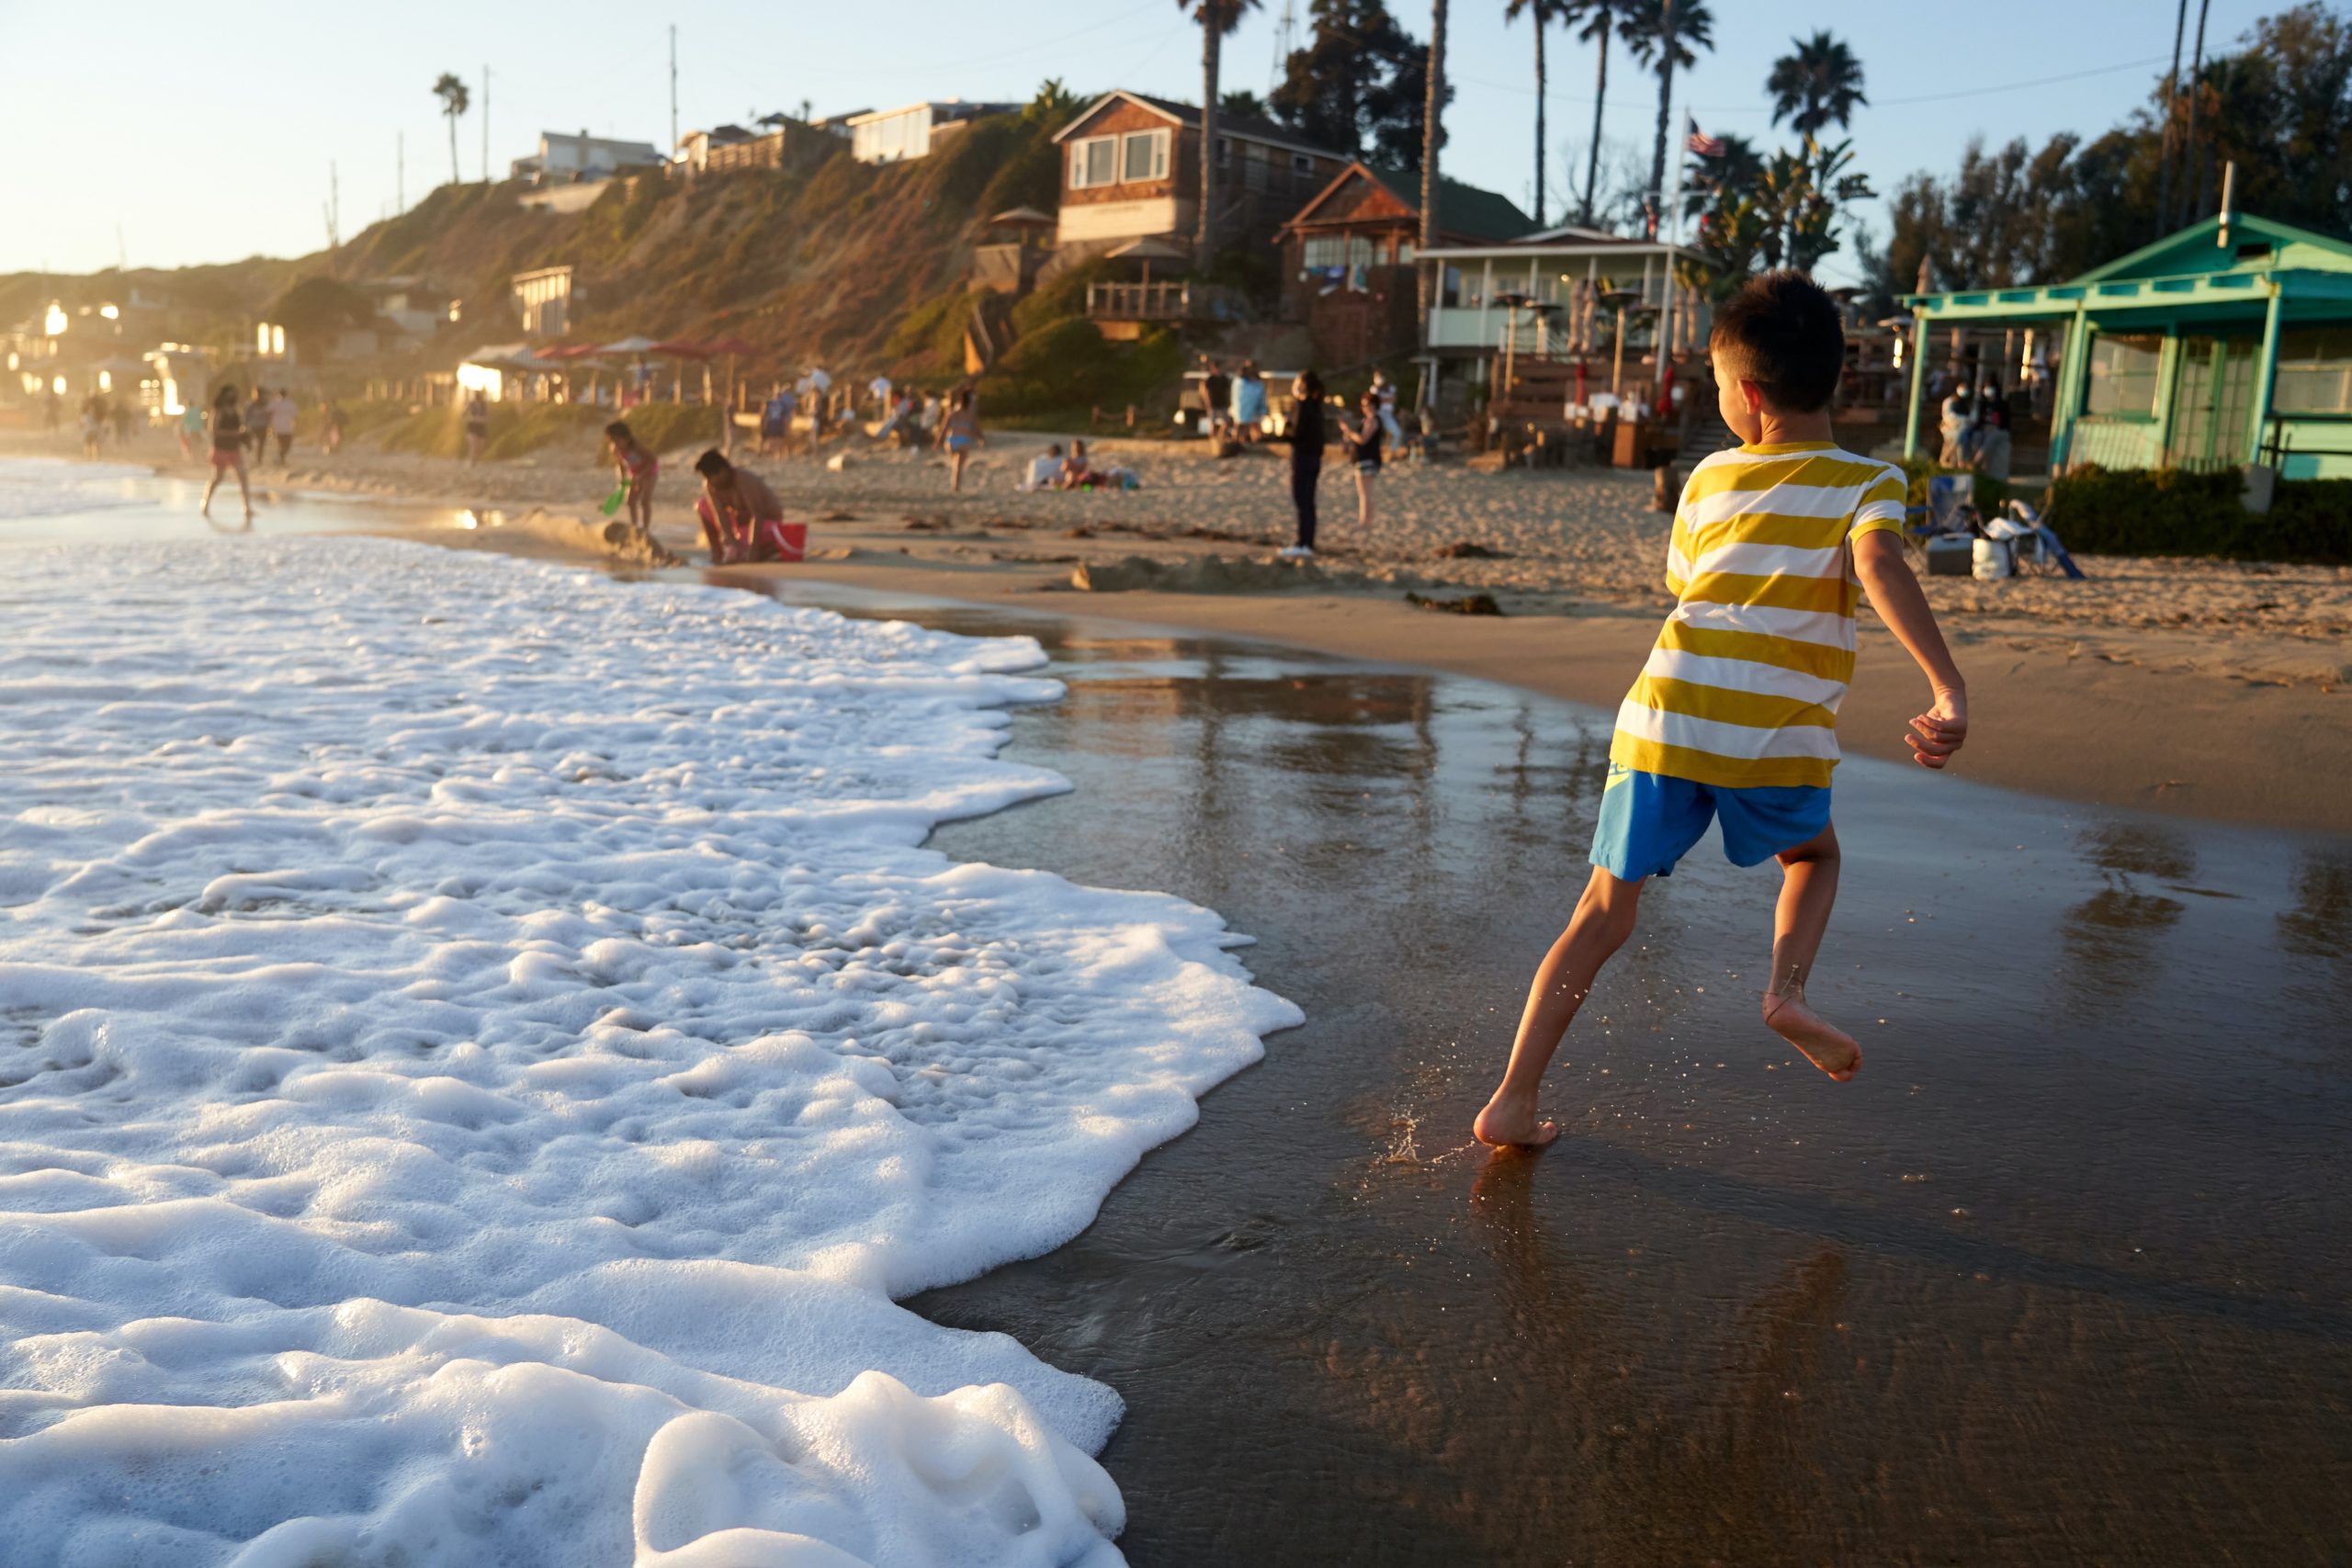 Children play in the sands at Crystal Cove